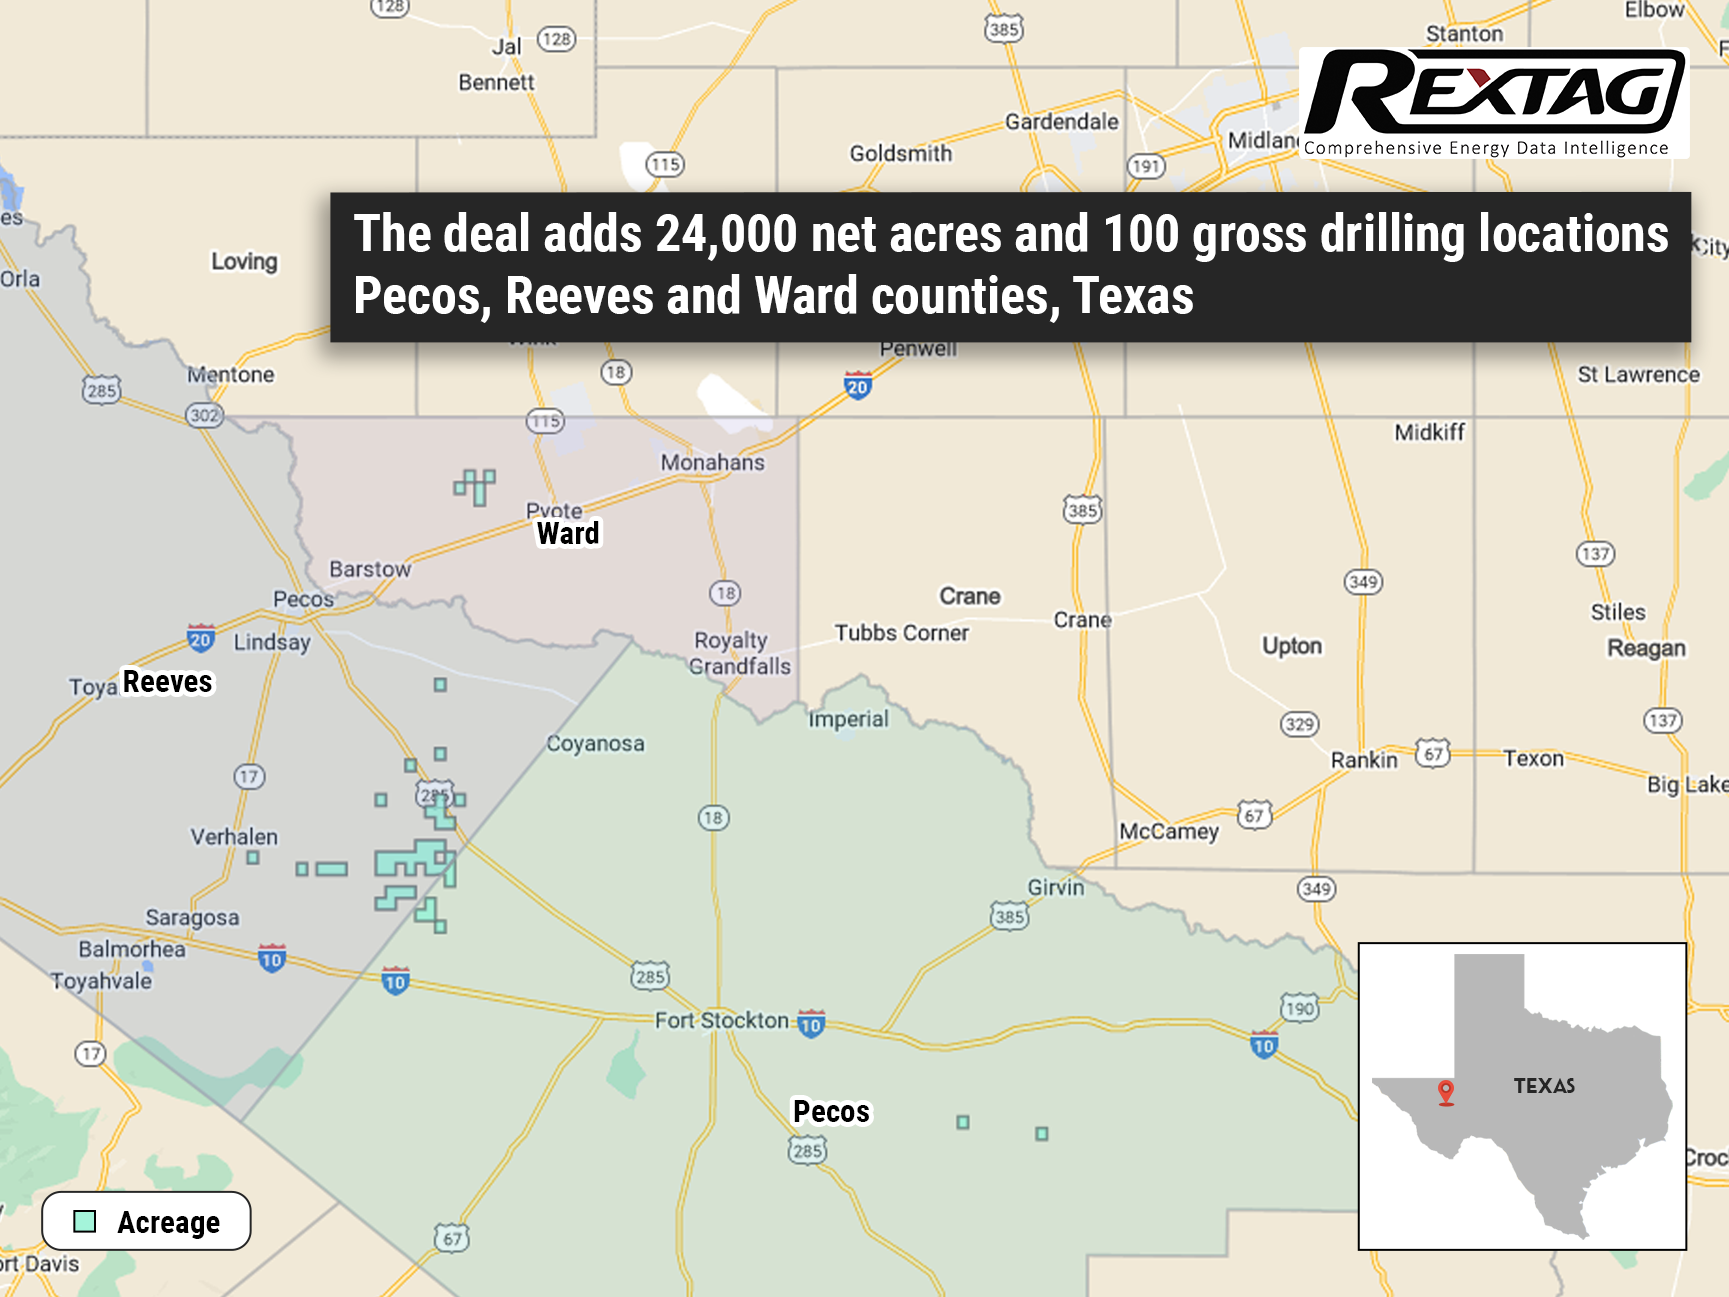 Vital-Energy-Raises-Production-Outlook-and-Capital-Spending-with-Significant-Permian-Basin-Acquisition